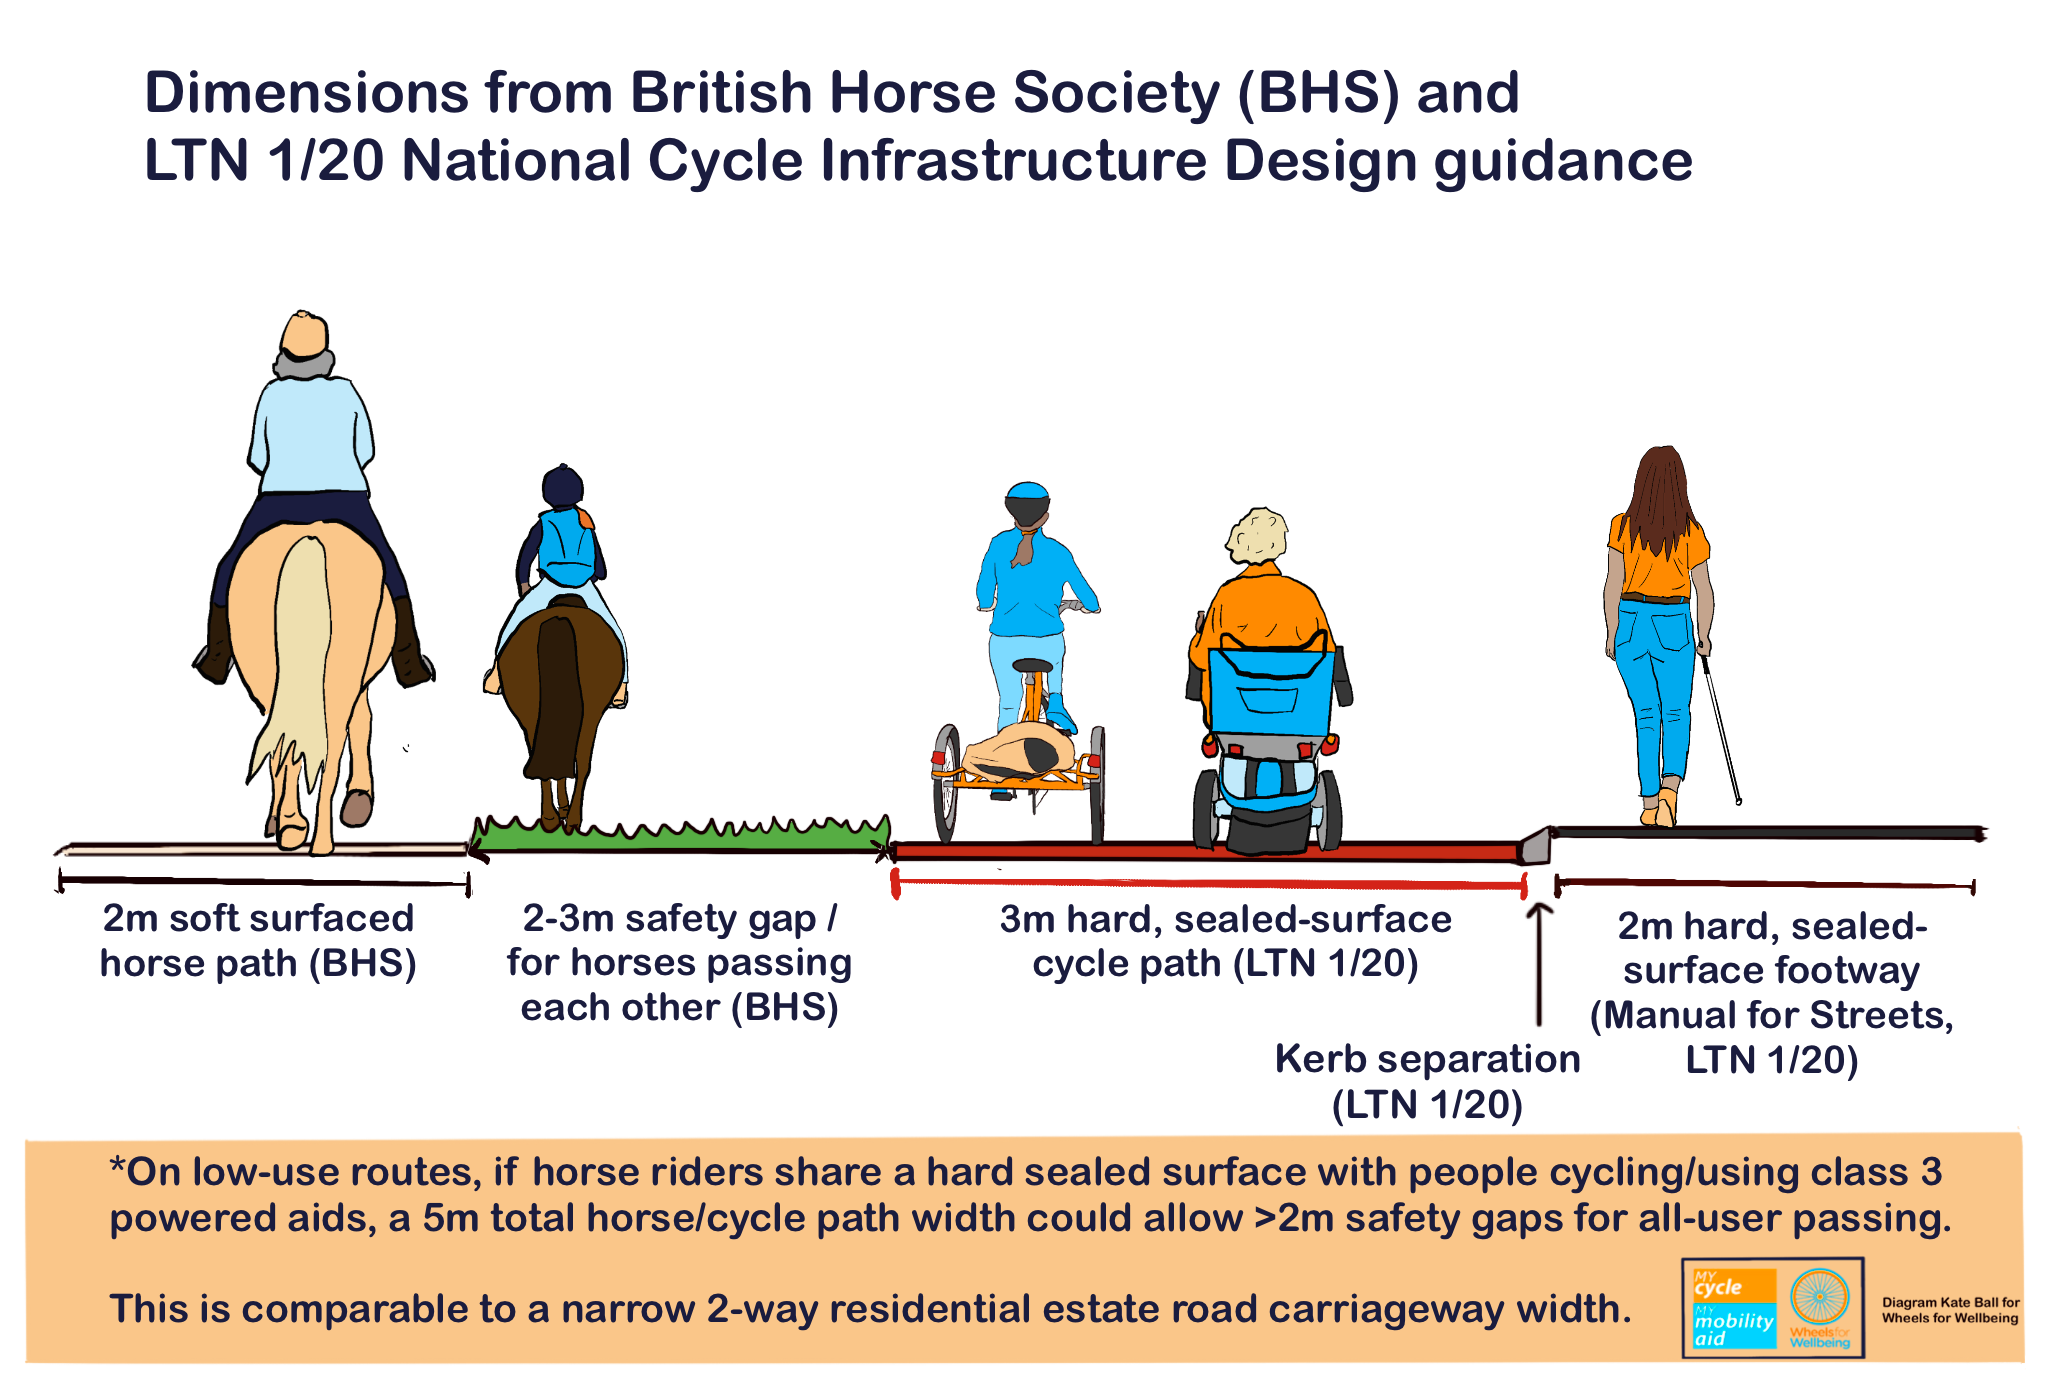 Diagram showing from left: A 2m width soft-surfaced horse path and a 2-3 safety/horse passing gap with grass surface, each with horse riders on them; A 3m hard sealed-surface cycle path with a tricycle rider and powerchair user on it; A chamfered kerb separating the cycle path and footway A 2m hard sealed-surface footway with a long cane user on it. Note at top: Dimensions from British Horse Society (BHS) and LTN 1/20 National Cycle Infrastructure Design guidance Note at bottom: On low-use routes, if horse riders share a hard sealed surface with people cycling/using class 3 powered aids, a 5m total horse/cycle path could allow >2m safety gaps for all-user passing. This is comparable to a narrow 2-way residential estate carriageway width.